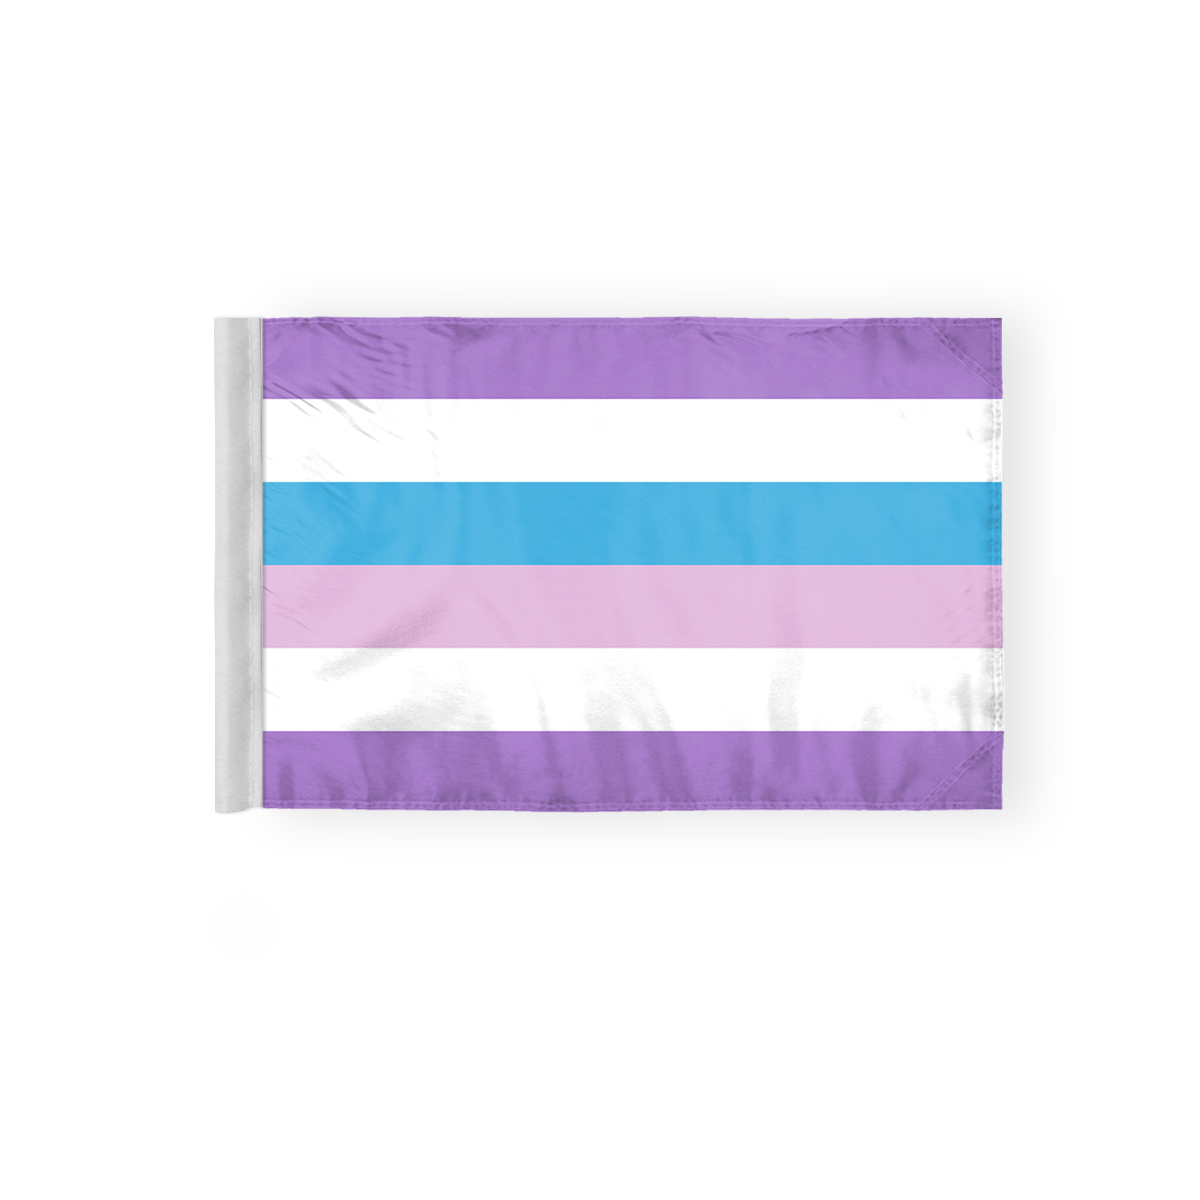 AGAS Large Bigender Pride Flag 10x15 Ft - Double Sided Printed 200D Nylon